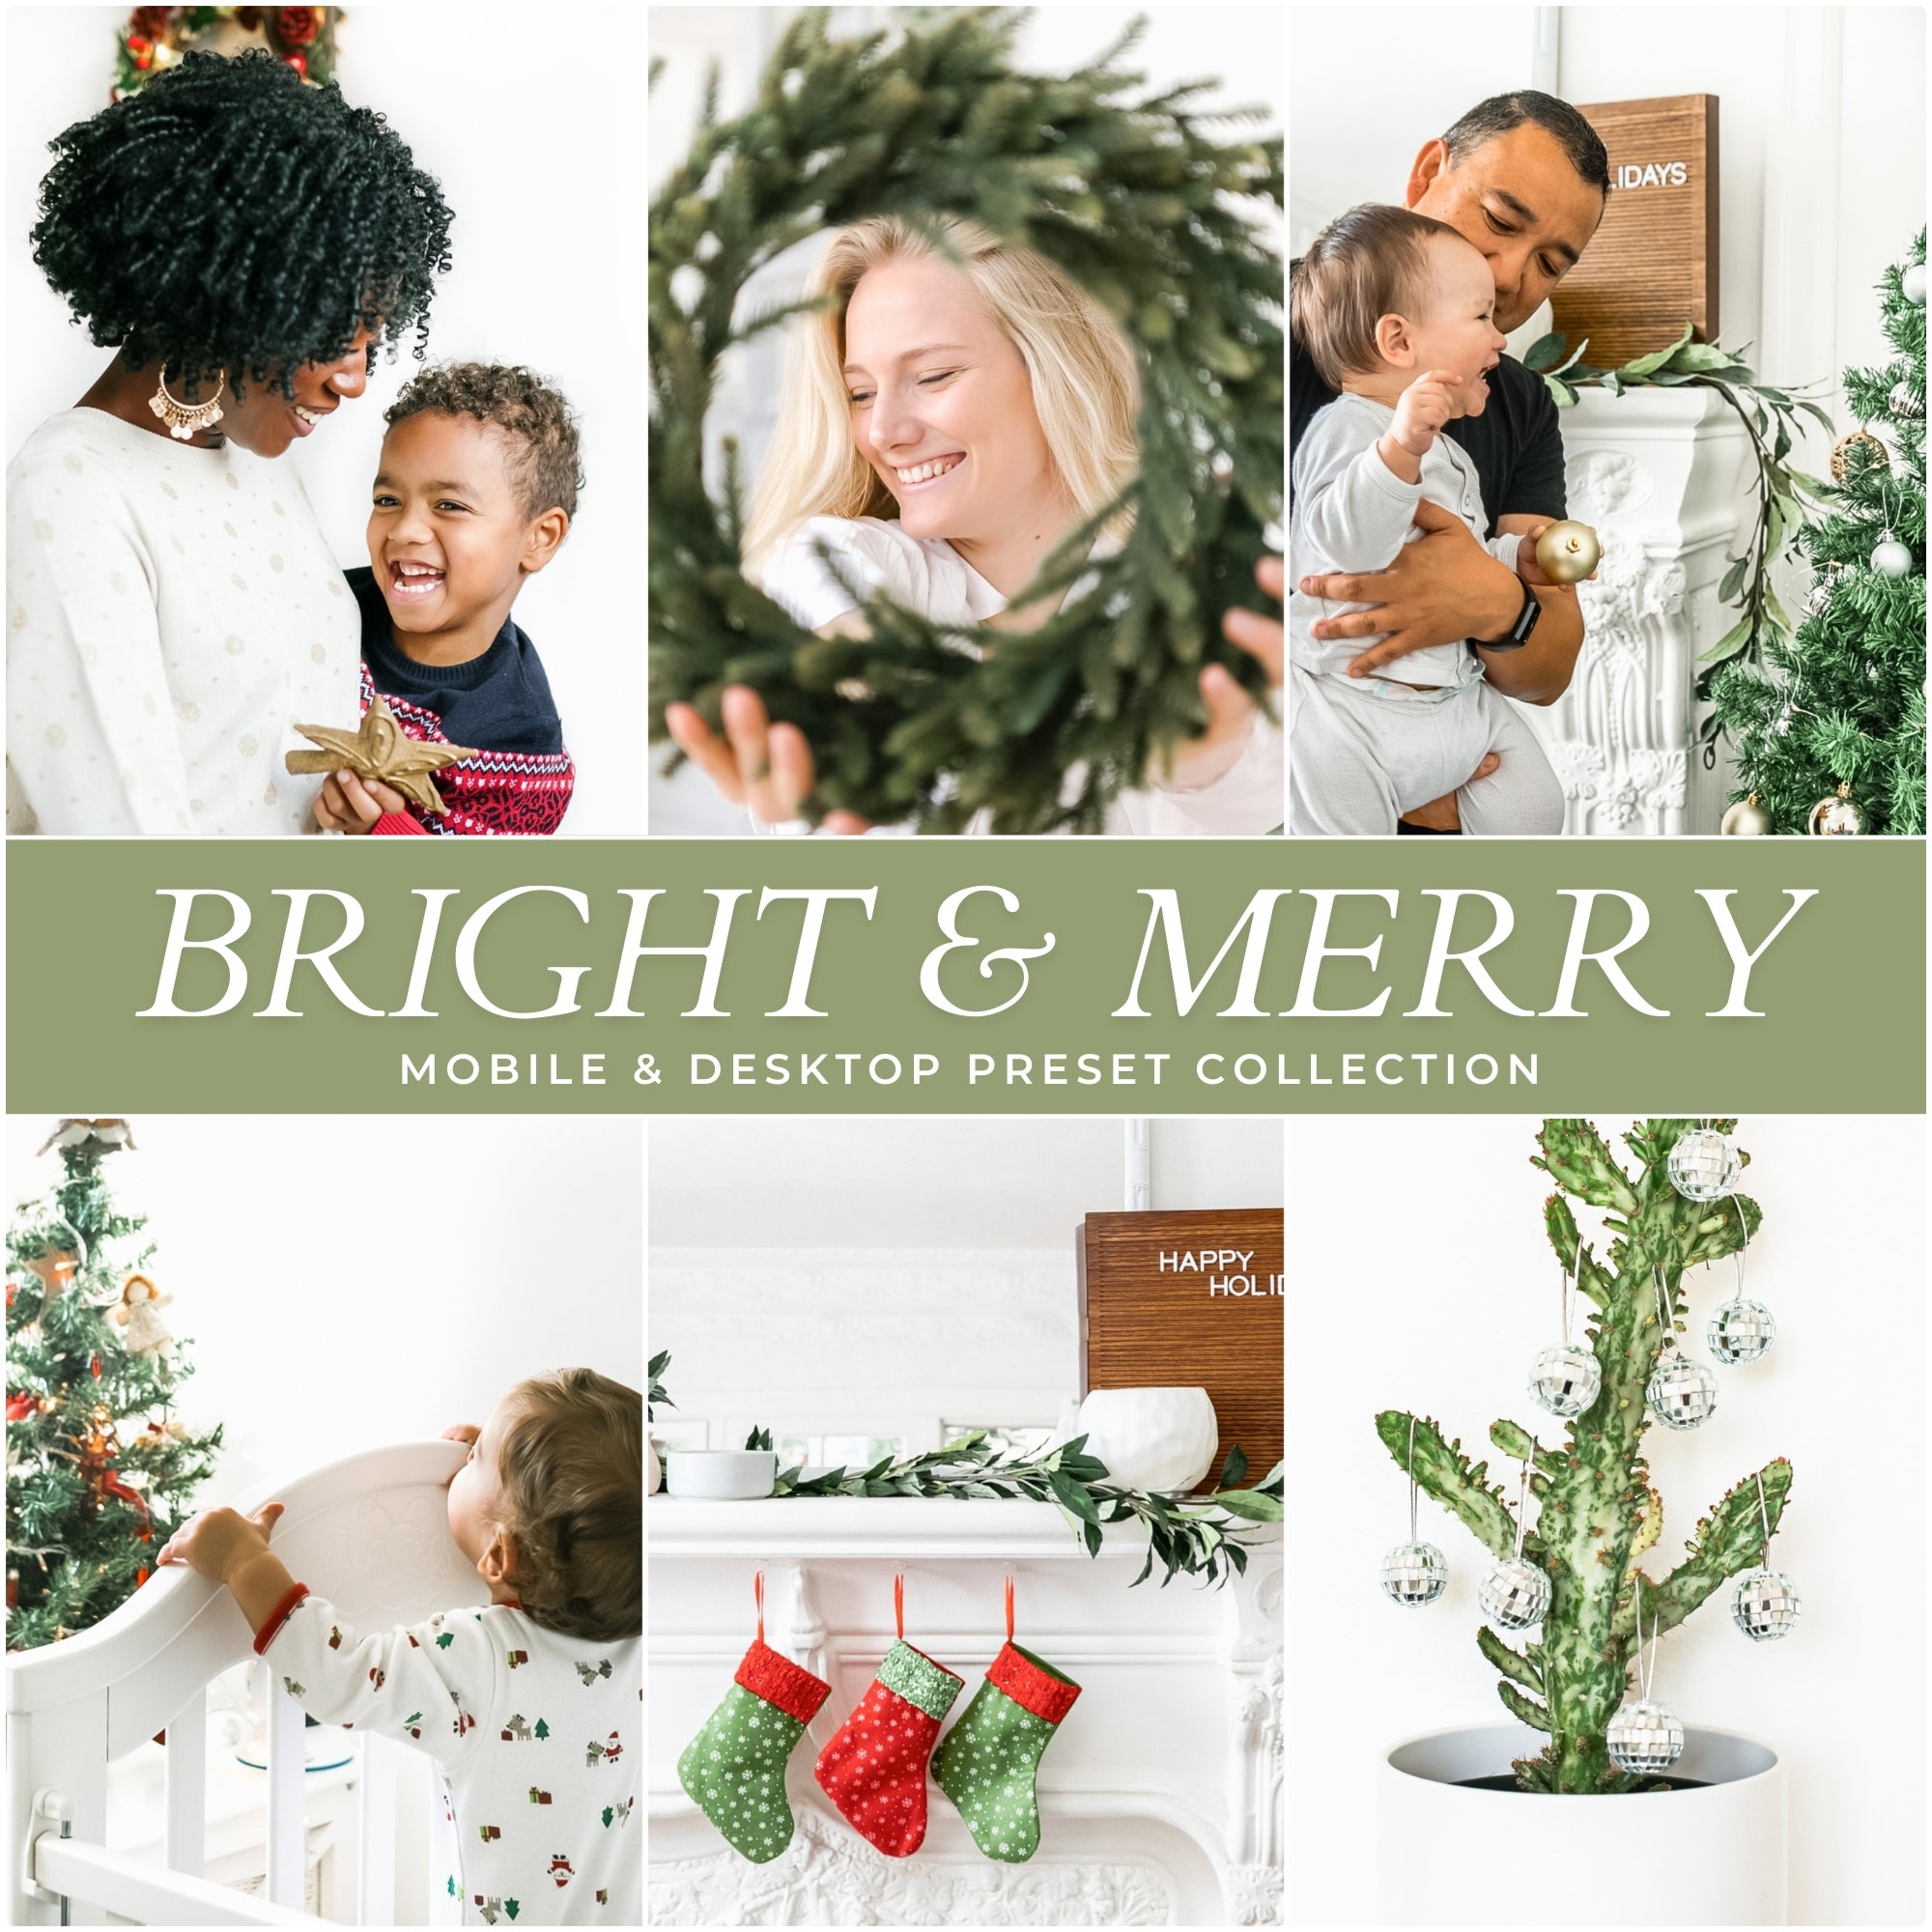 Bright & Merry Christmas Lightroom Presets The Best Photo Editing Preset Filters For Christmas And Winter Holiday Photos with Adobe Lightroom Mobile And Desktop For Photographers and Instagram Influencers By Lou And Marks Presets